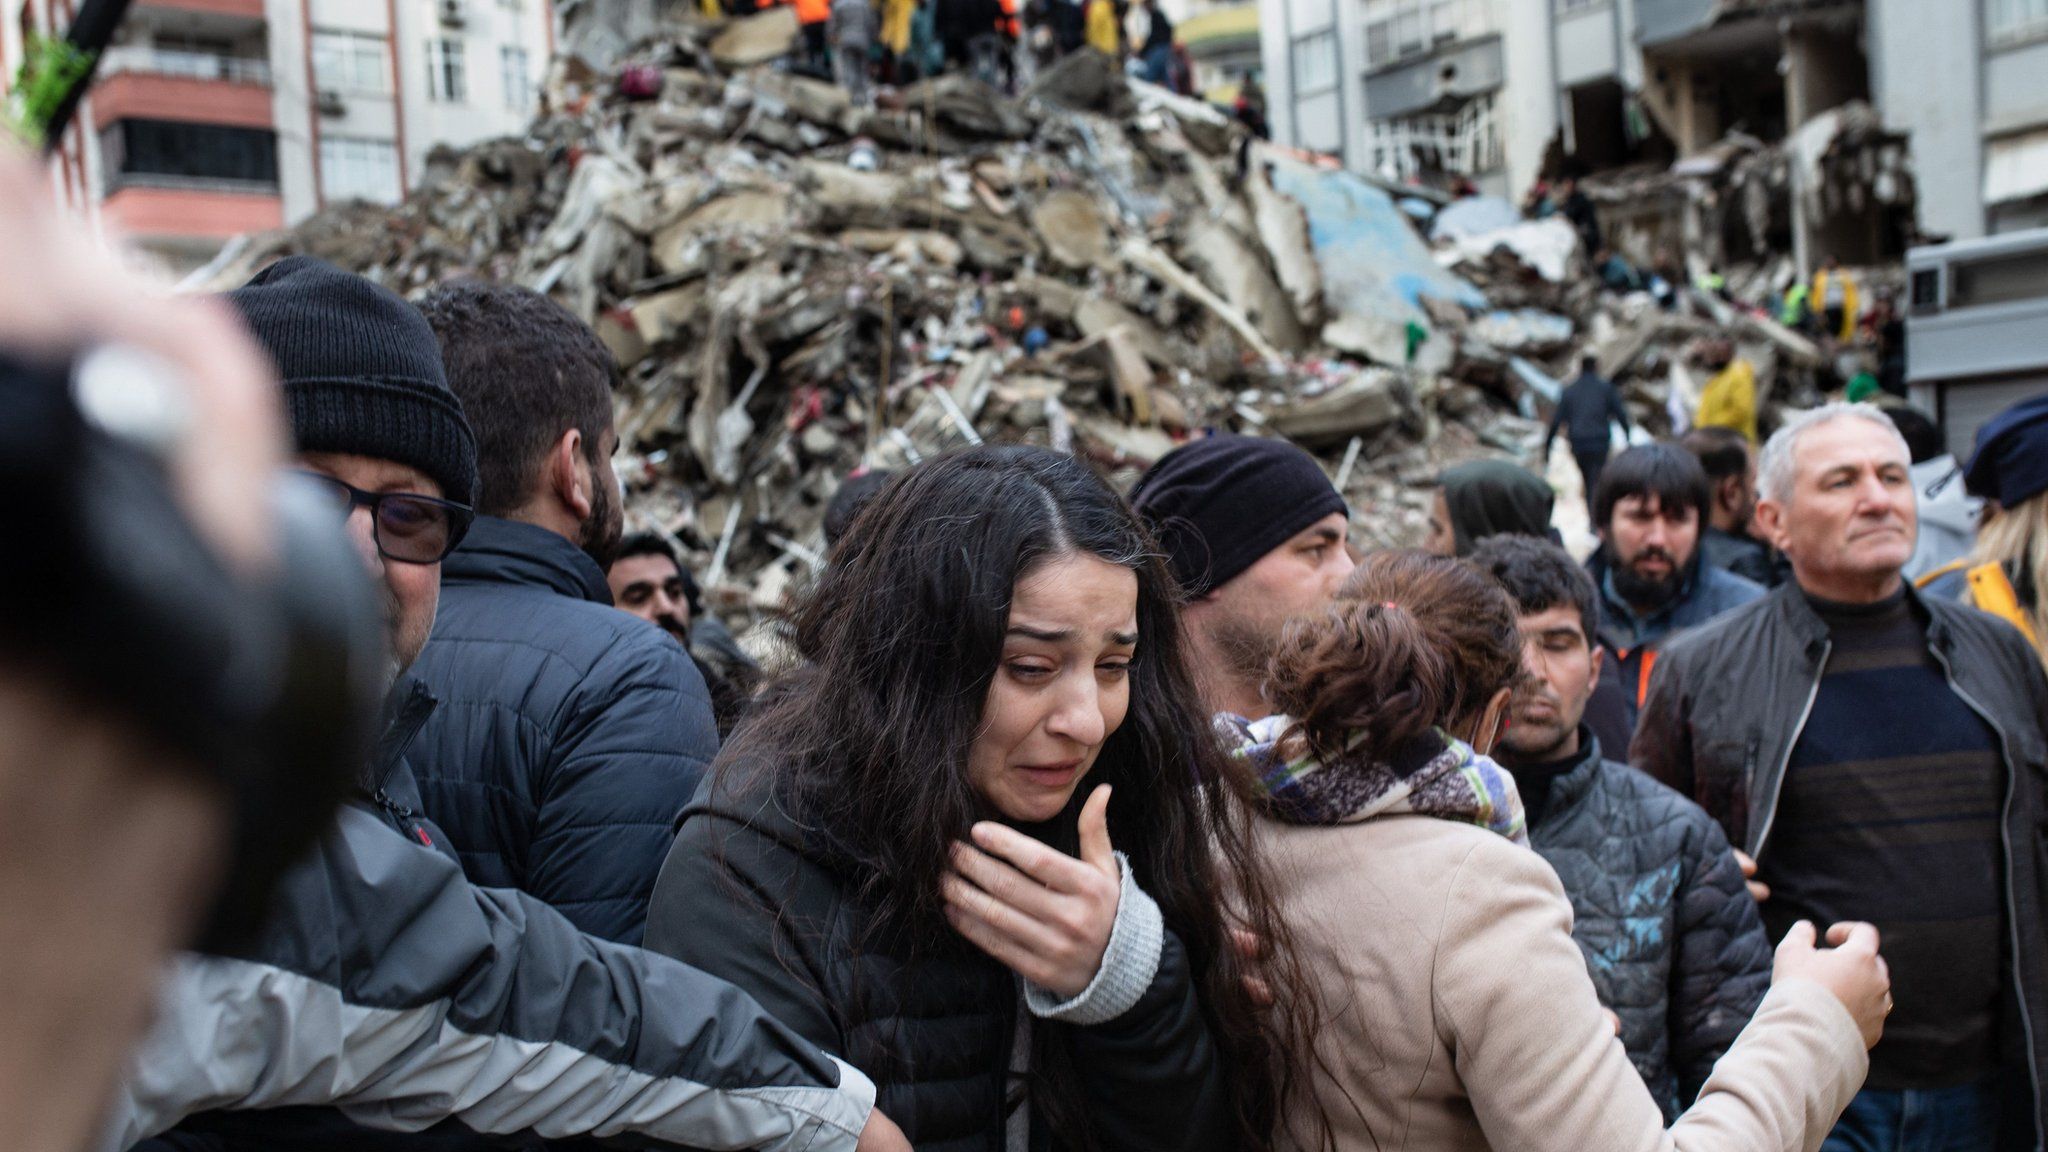 A woman reacts as rescuers search for survivors through the rubble of collapsed buildings in Adana